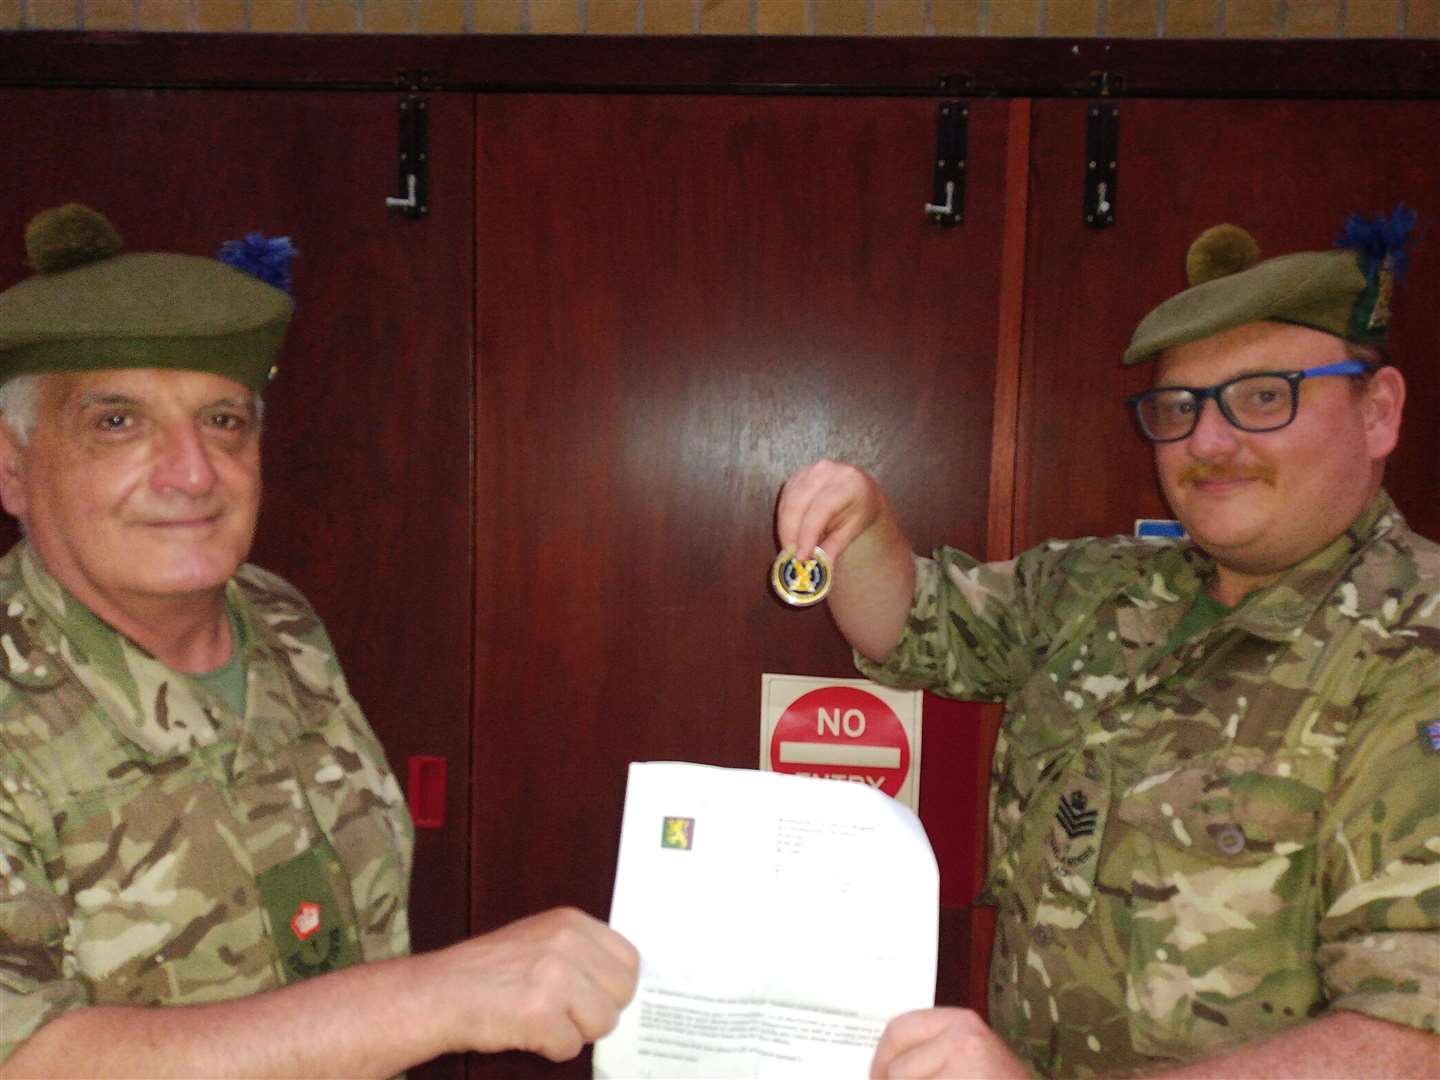 Staff Sergeant Instructor Graeme Wells (right) being presented with his Colonel Cadet Coin and letter of citation from Major Raymond Cameron, Company Commander, Moray Company.